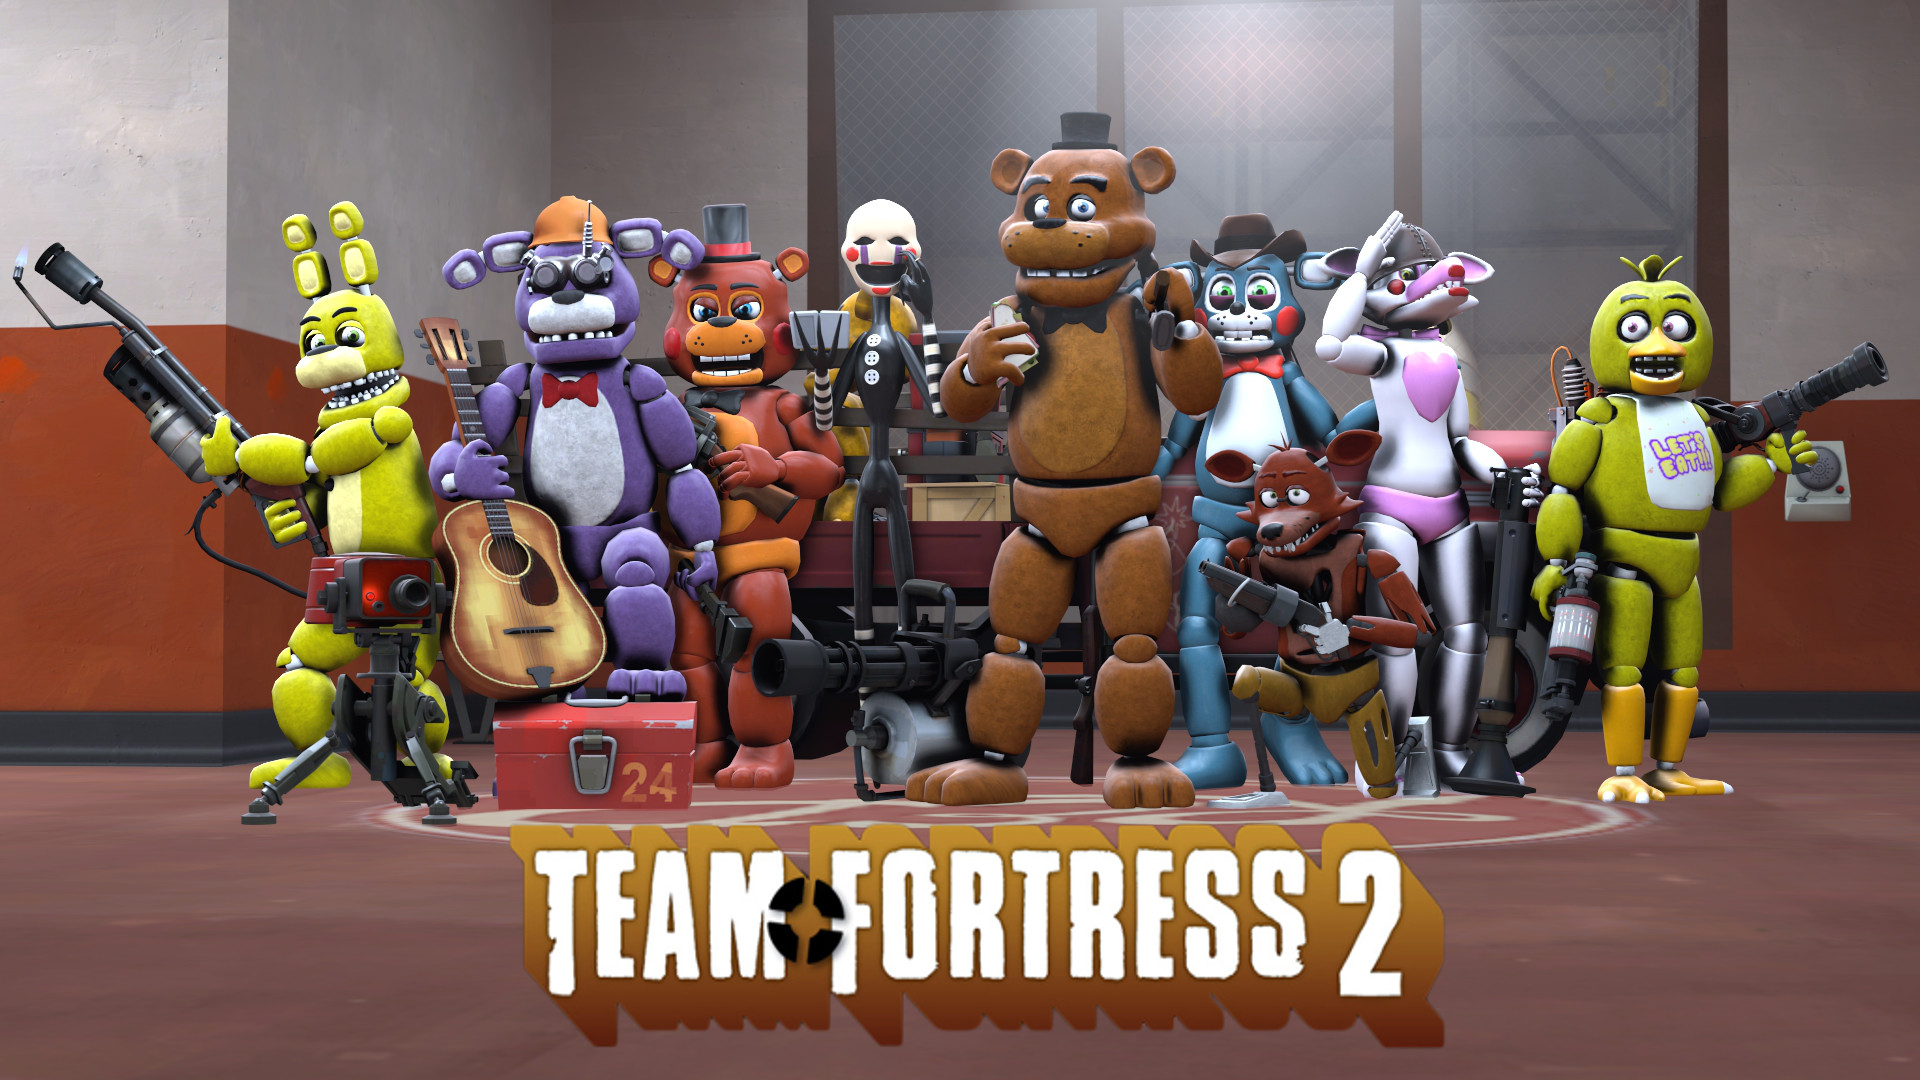 1920x1080 FNAF and TF2 Crossover. by TalonDang on DeviantArt